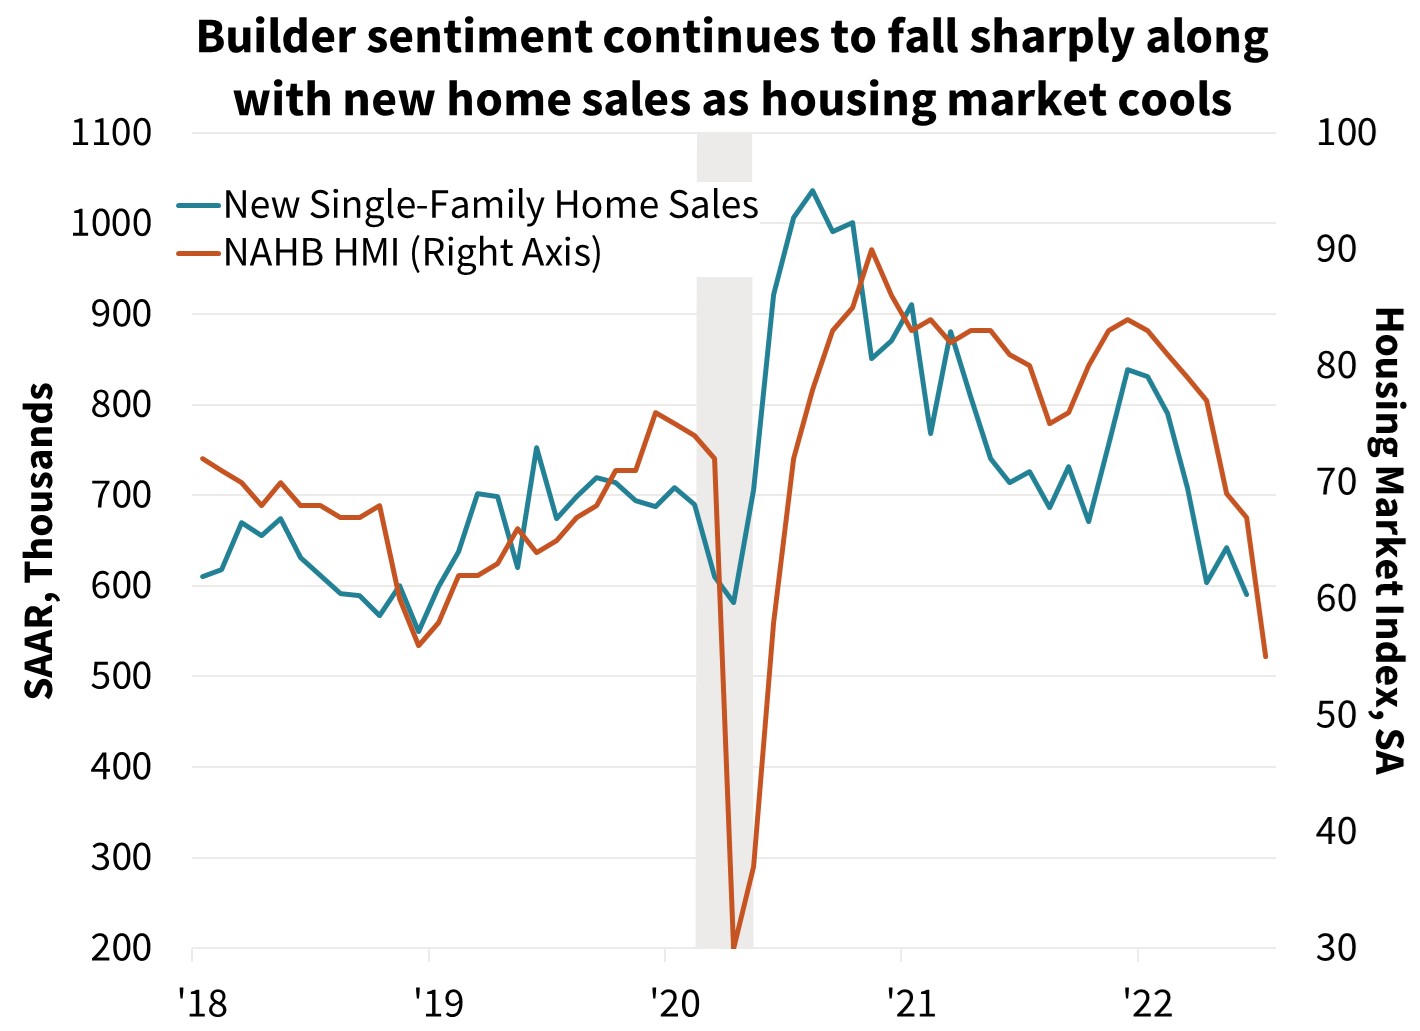  Builder sentiment continues to fall sharply along with new home sales as housing market cools 